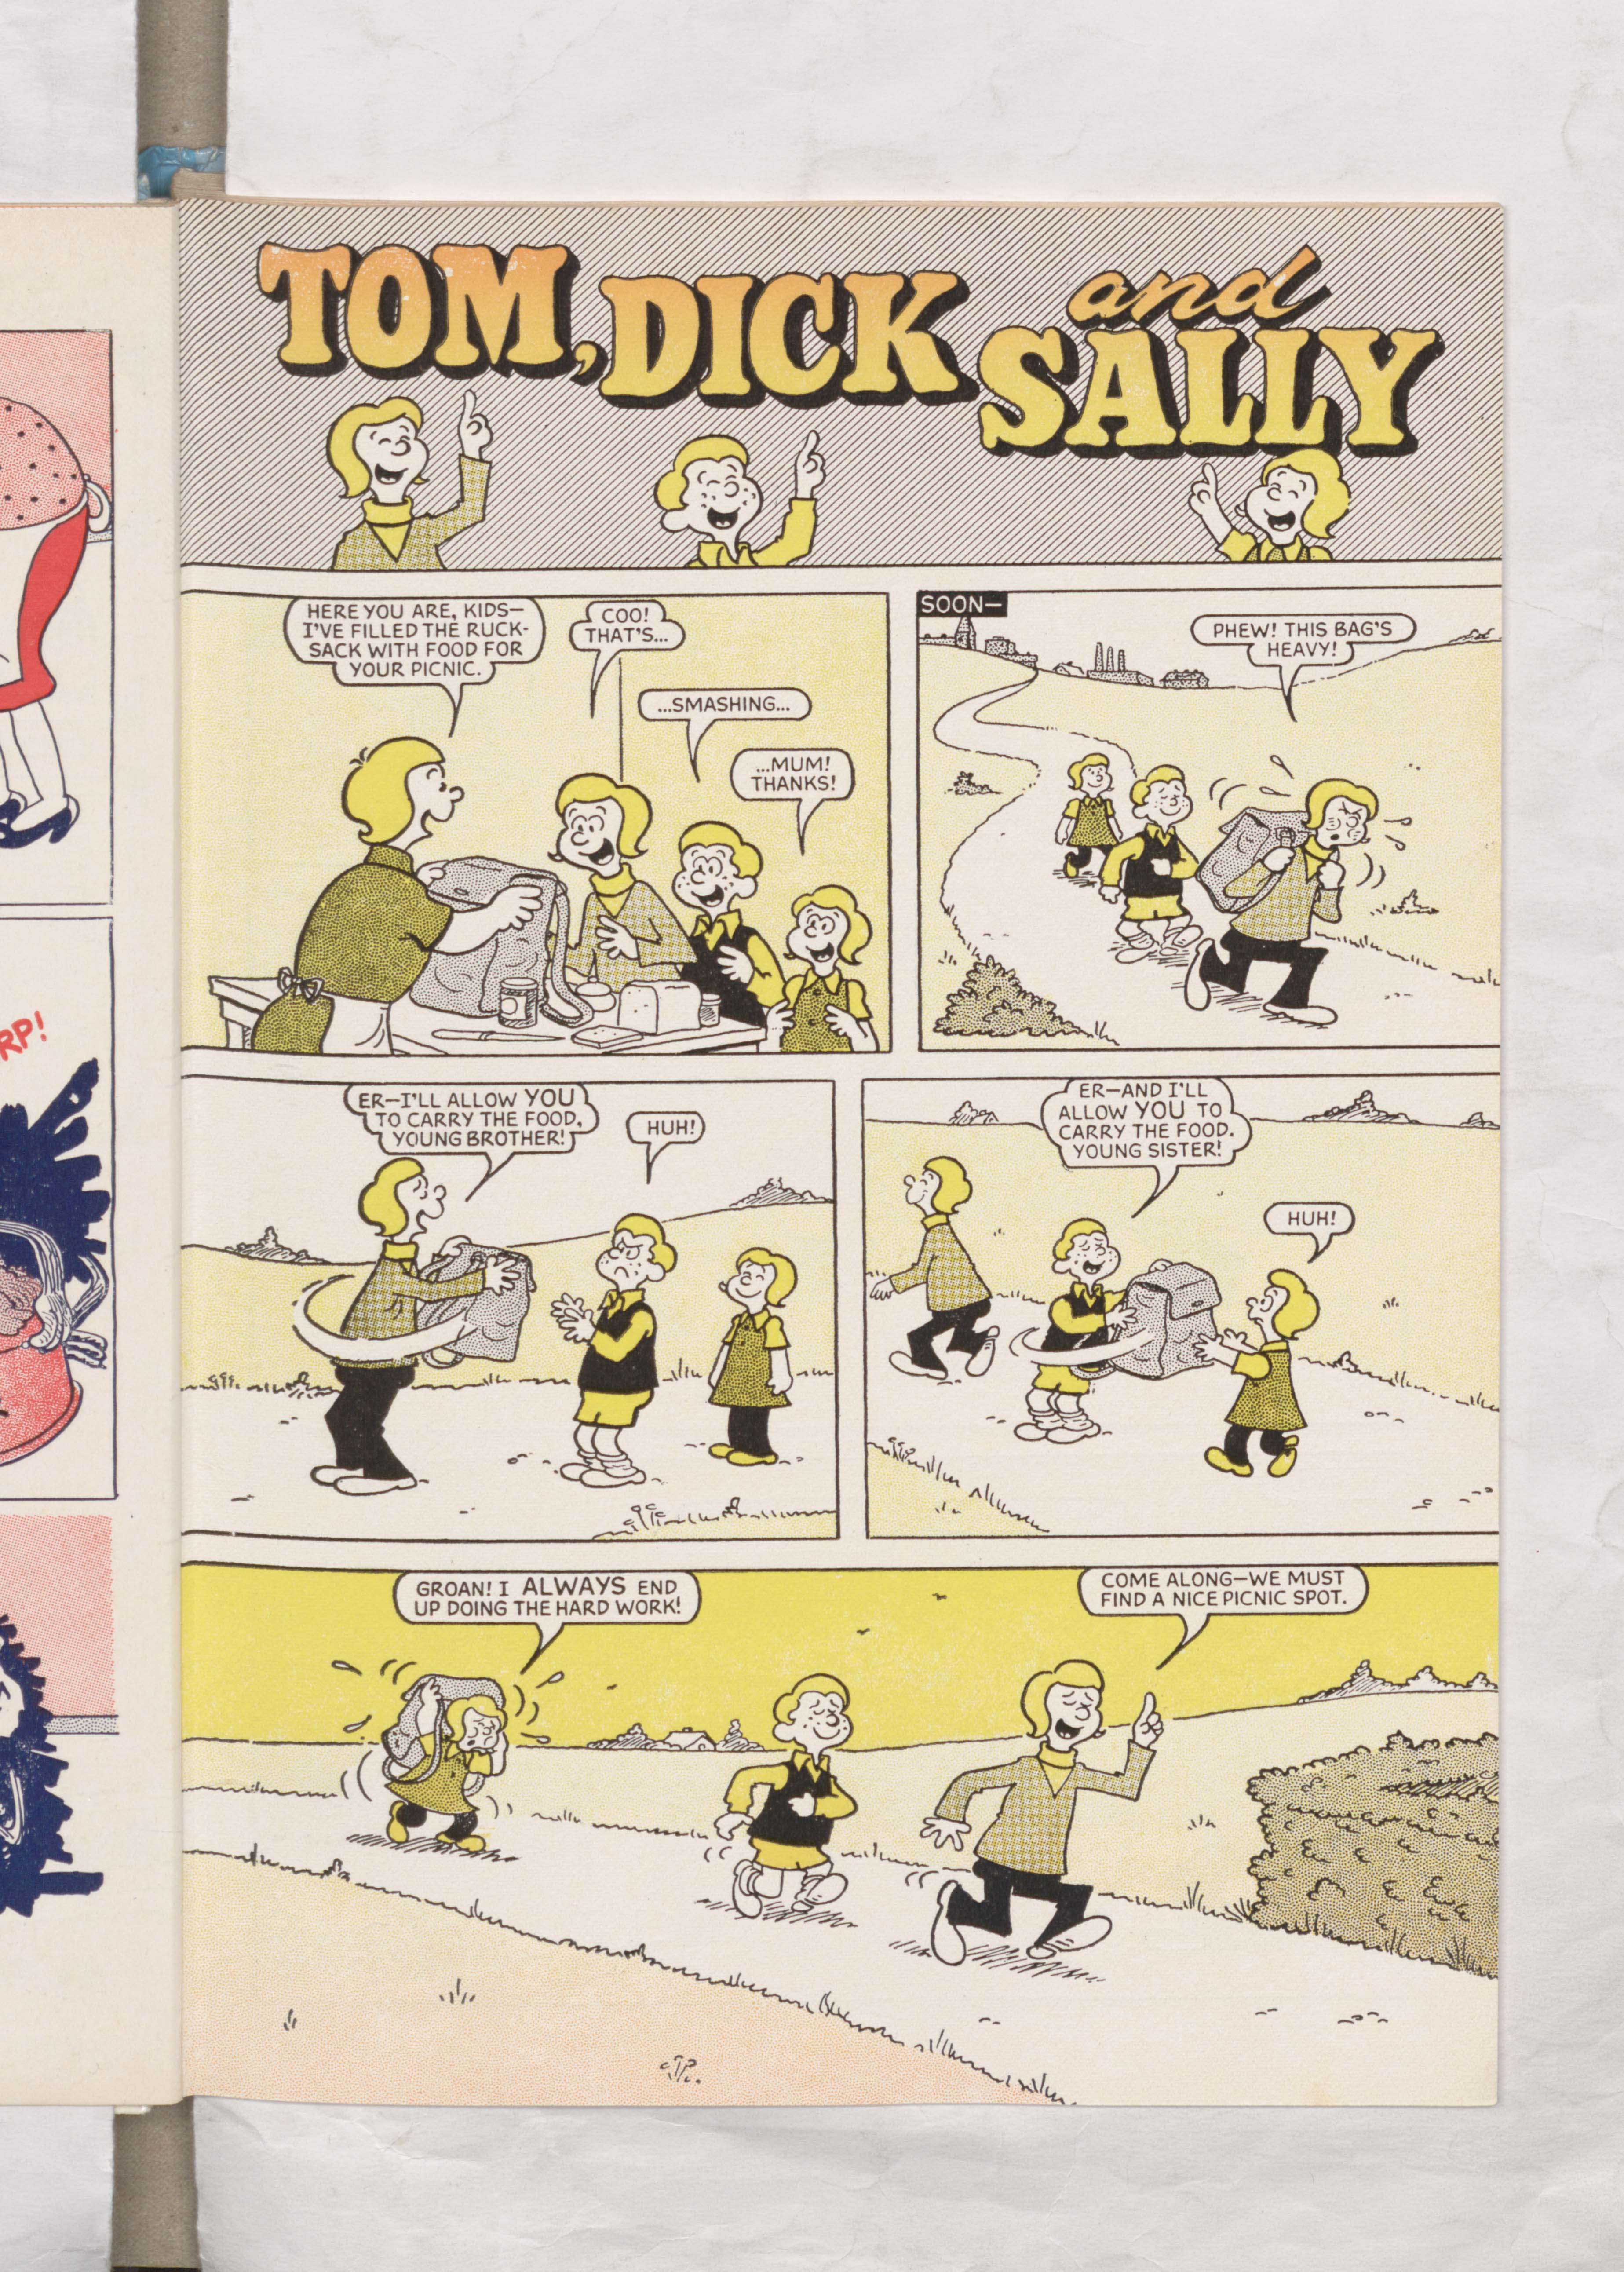 Meet Tom, Dick, and Sally! Page 1 - Beano Book 1975 Annual